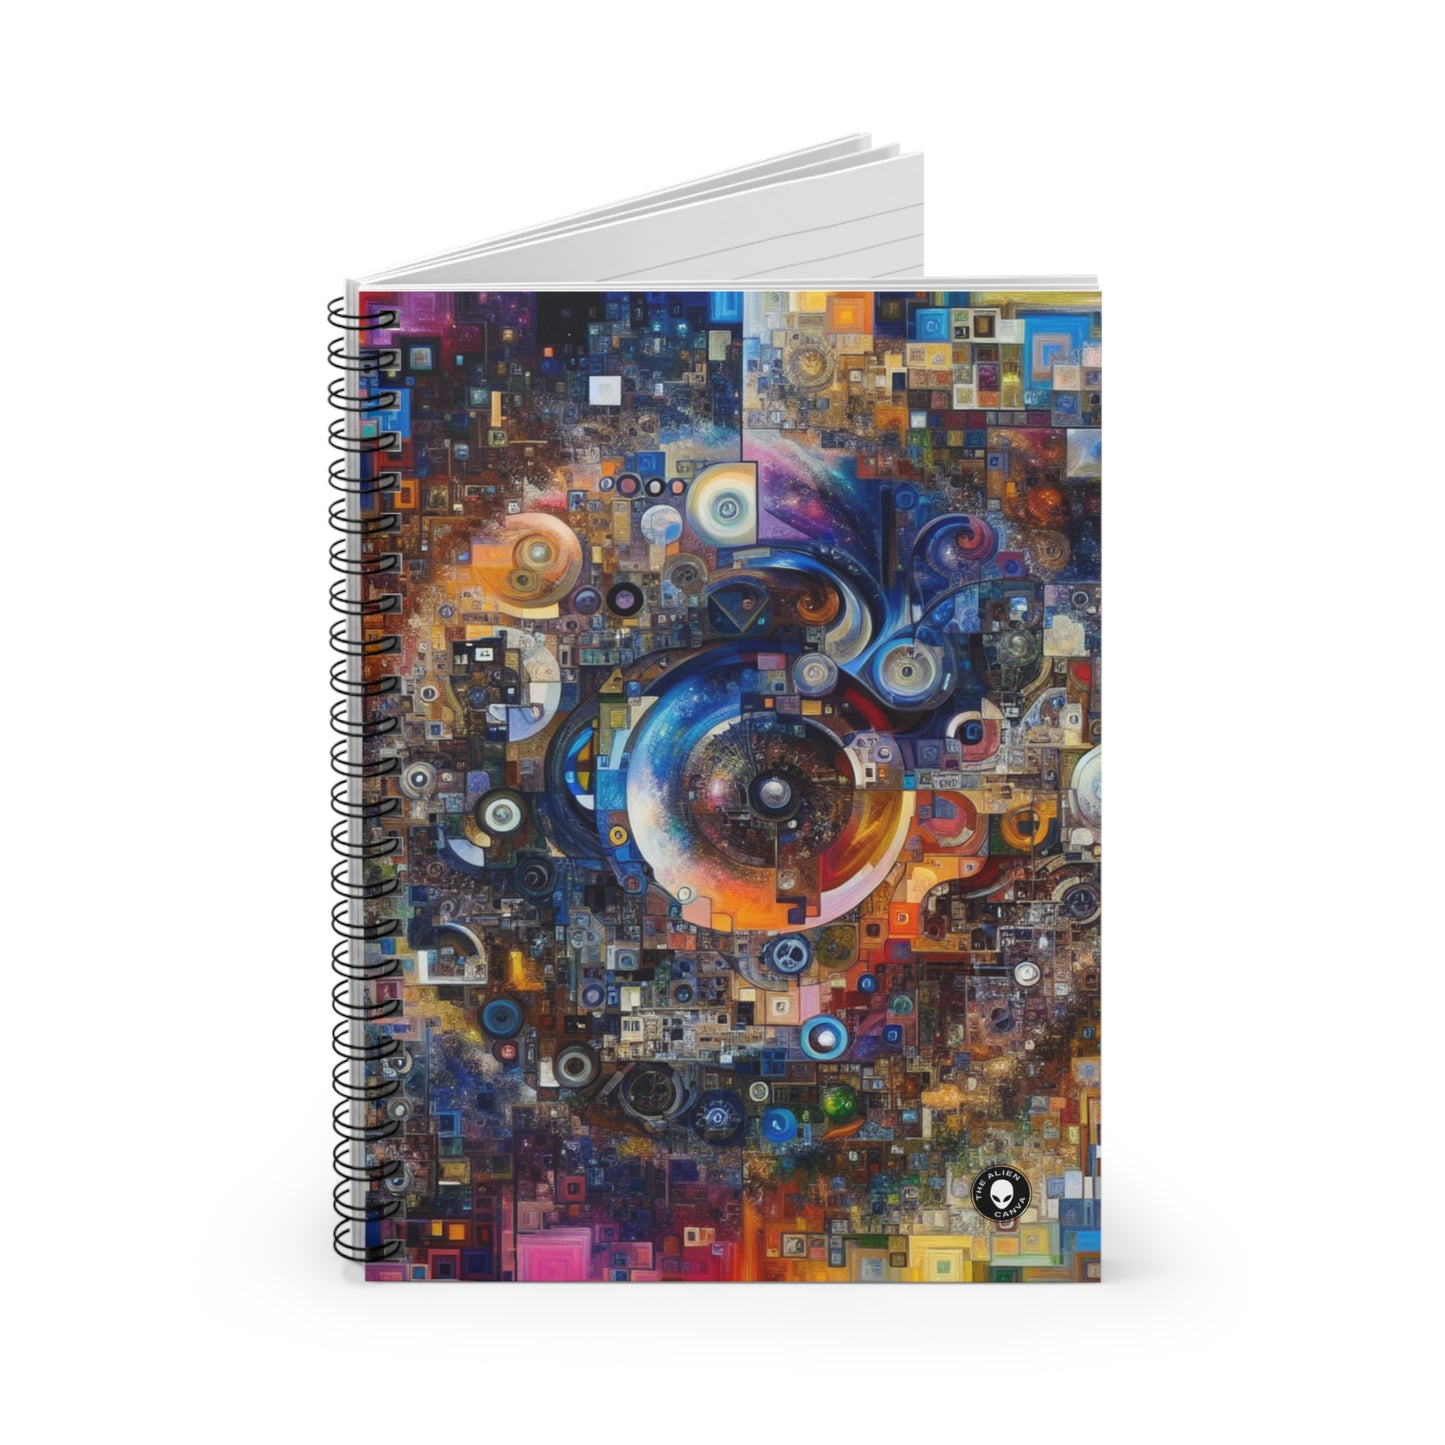 "Perception Distorted: A Postmodern Commentary on Reality" - The Alien Spiral Notebook (Ruled Line) Postmodern Art